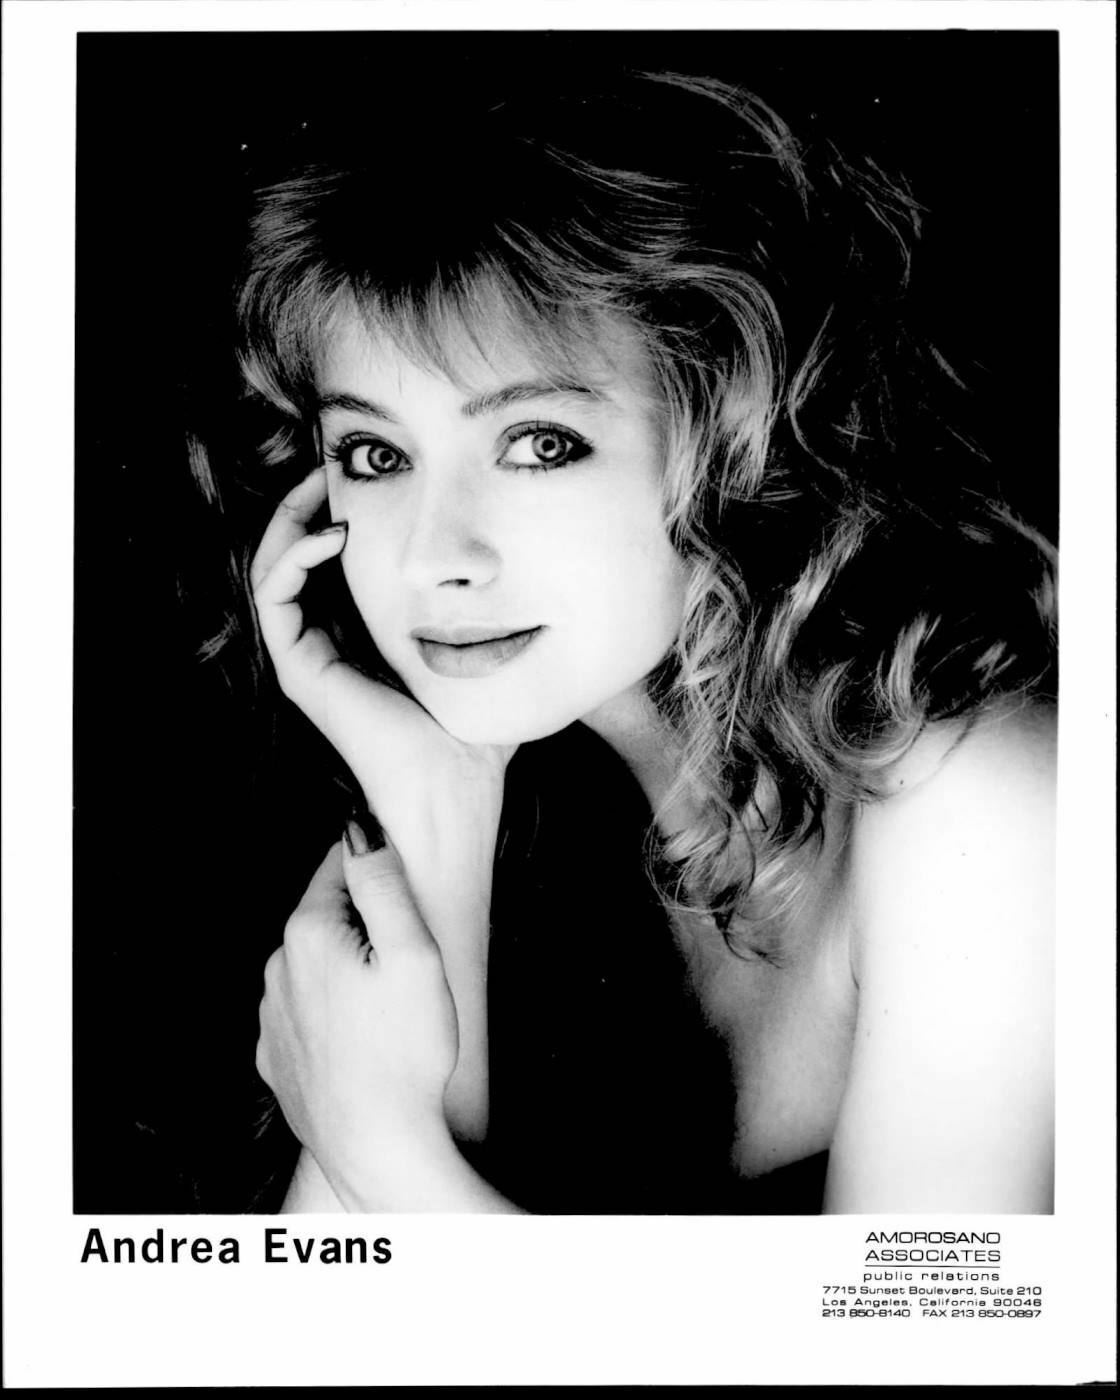 Andrea Evans - 8x10 Headshot Agency Photo Poster painting - Passions